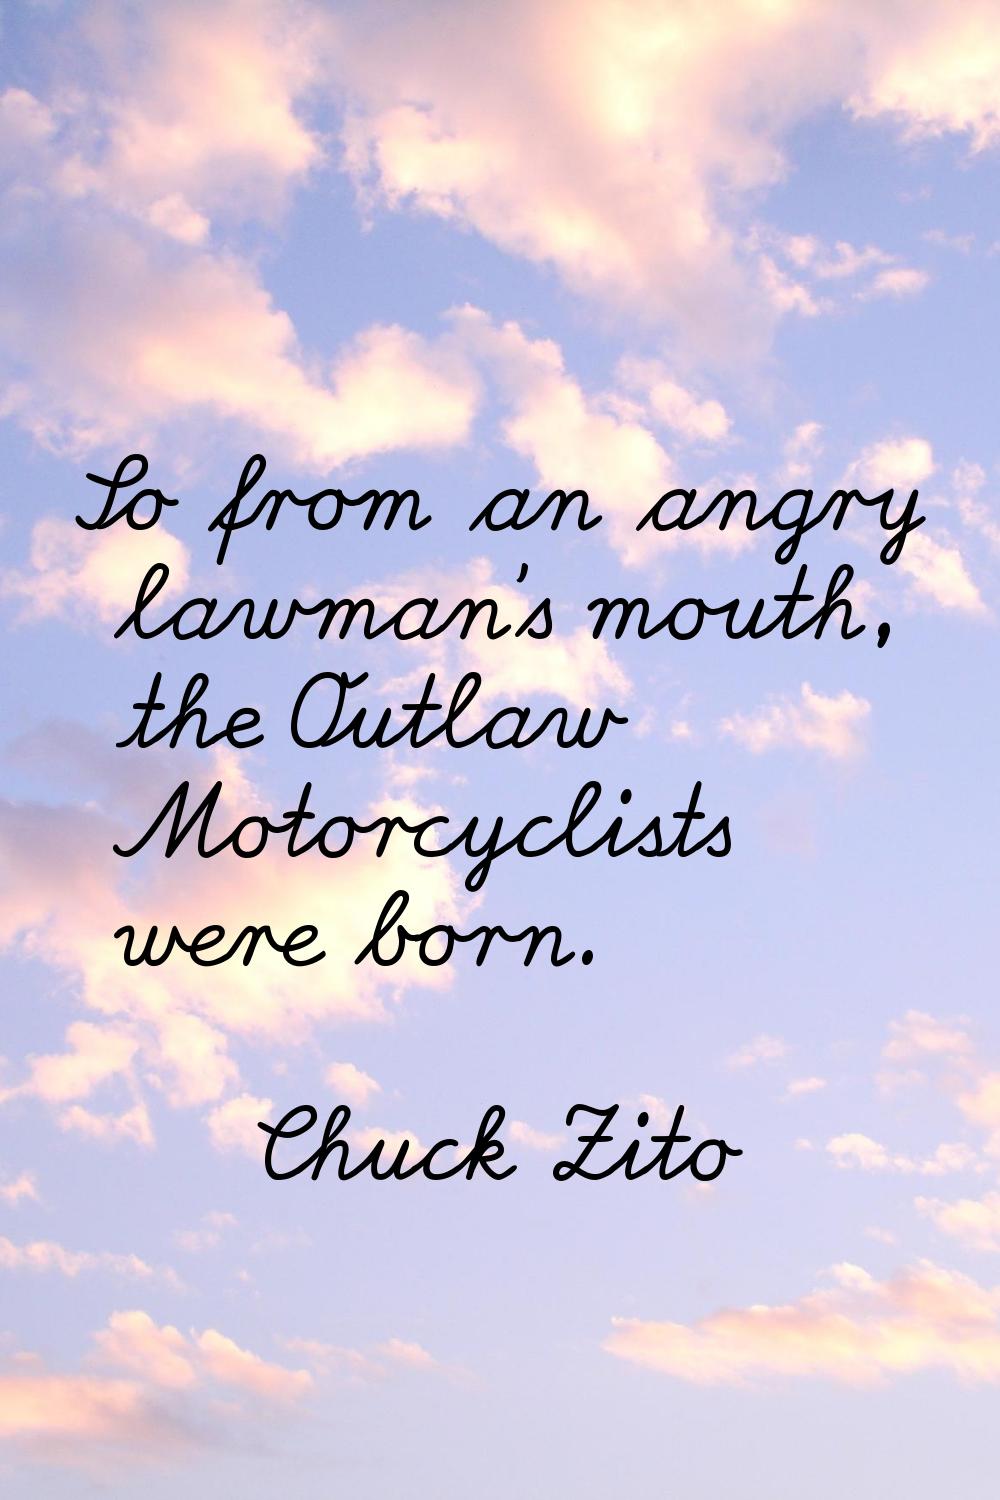 So from an angry lawman's mouth, the Outlaw Motorcyclists were born.